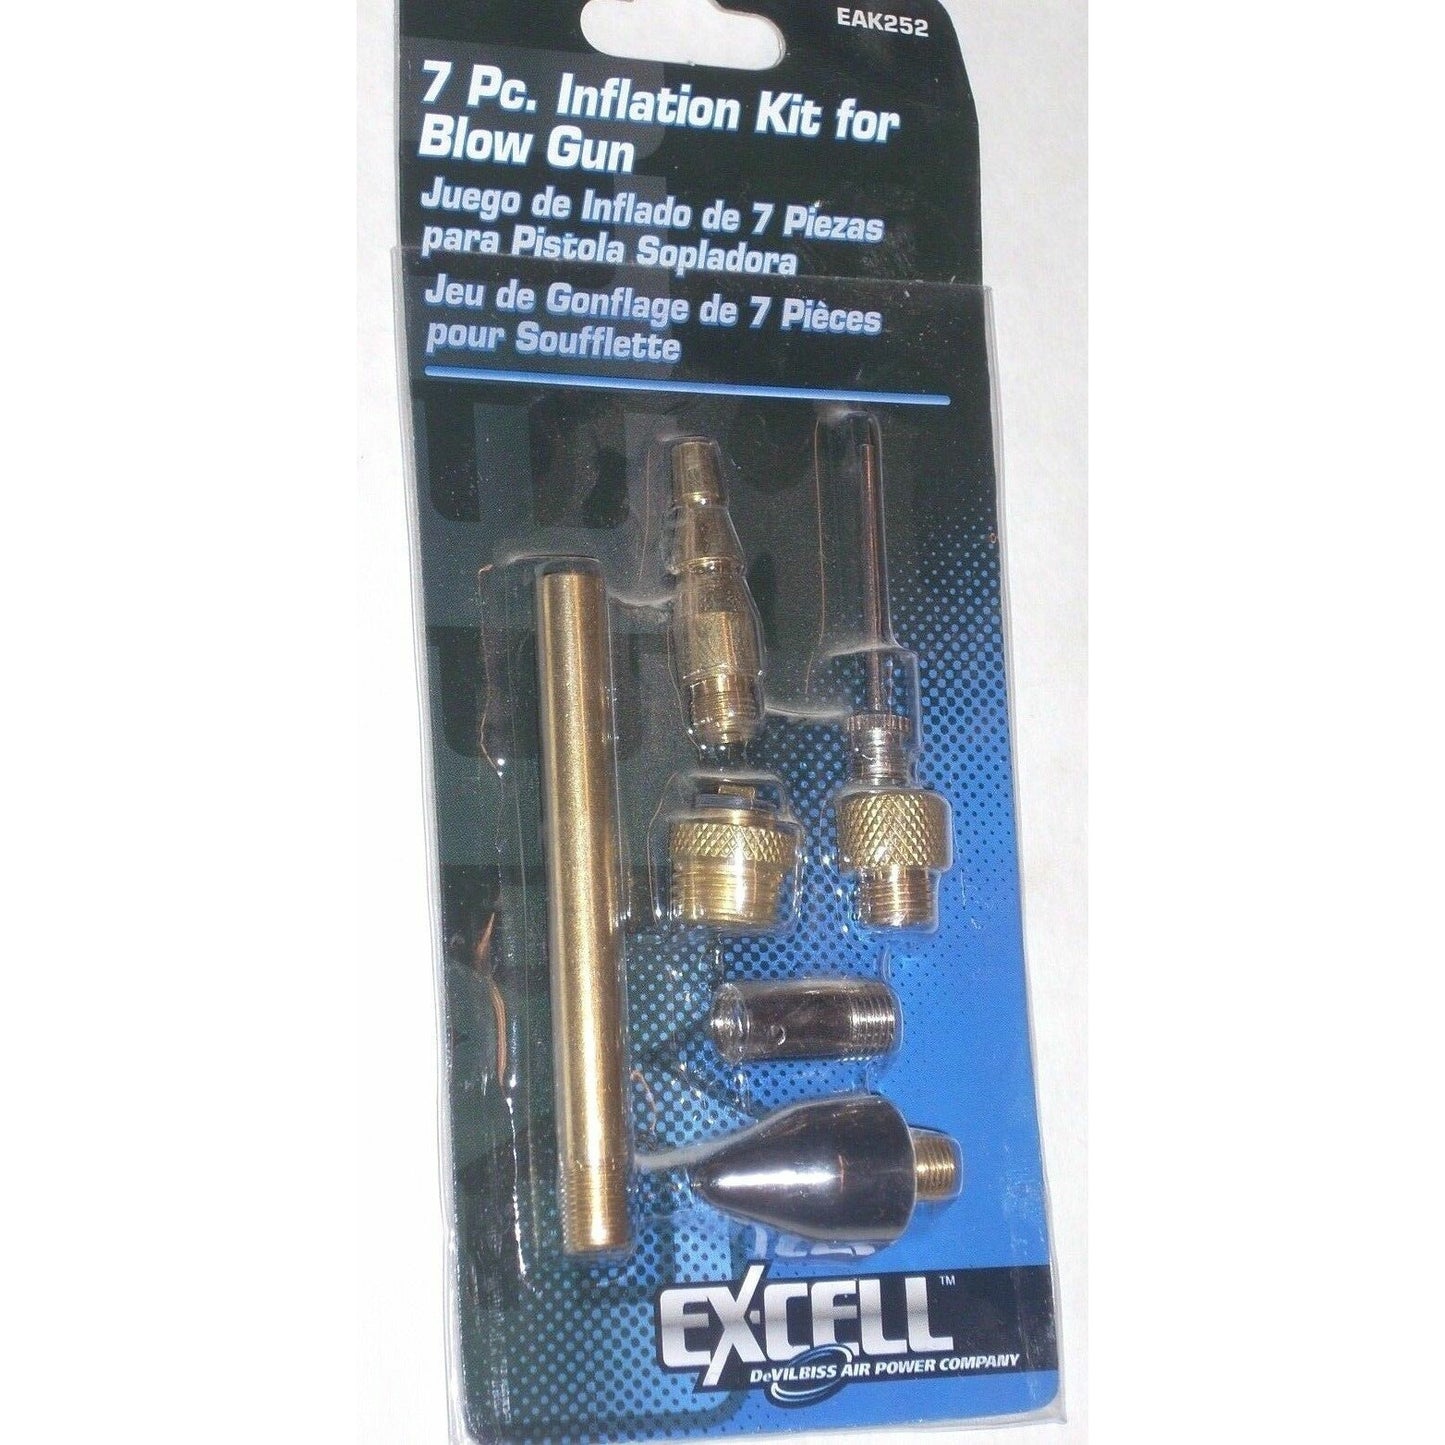 Ex-Cell EAK252 7pc Inflation Kit for Air Blow Gun Nozzle Needle Fittings